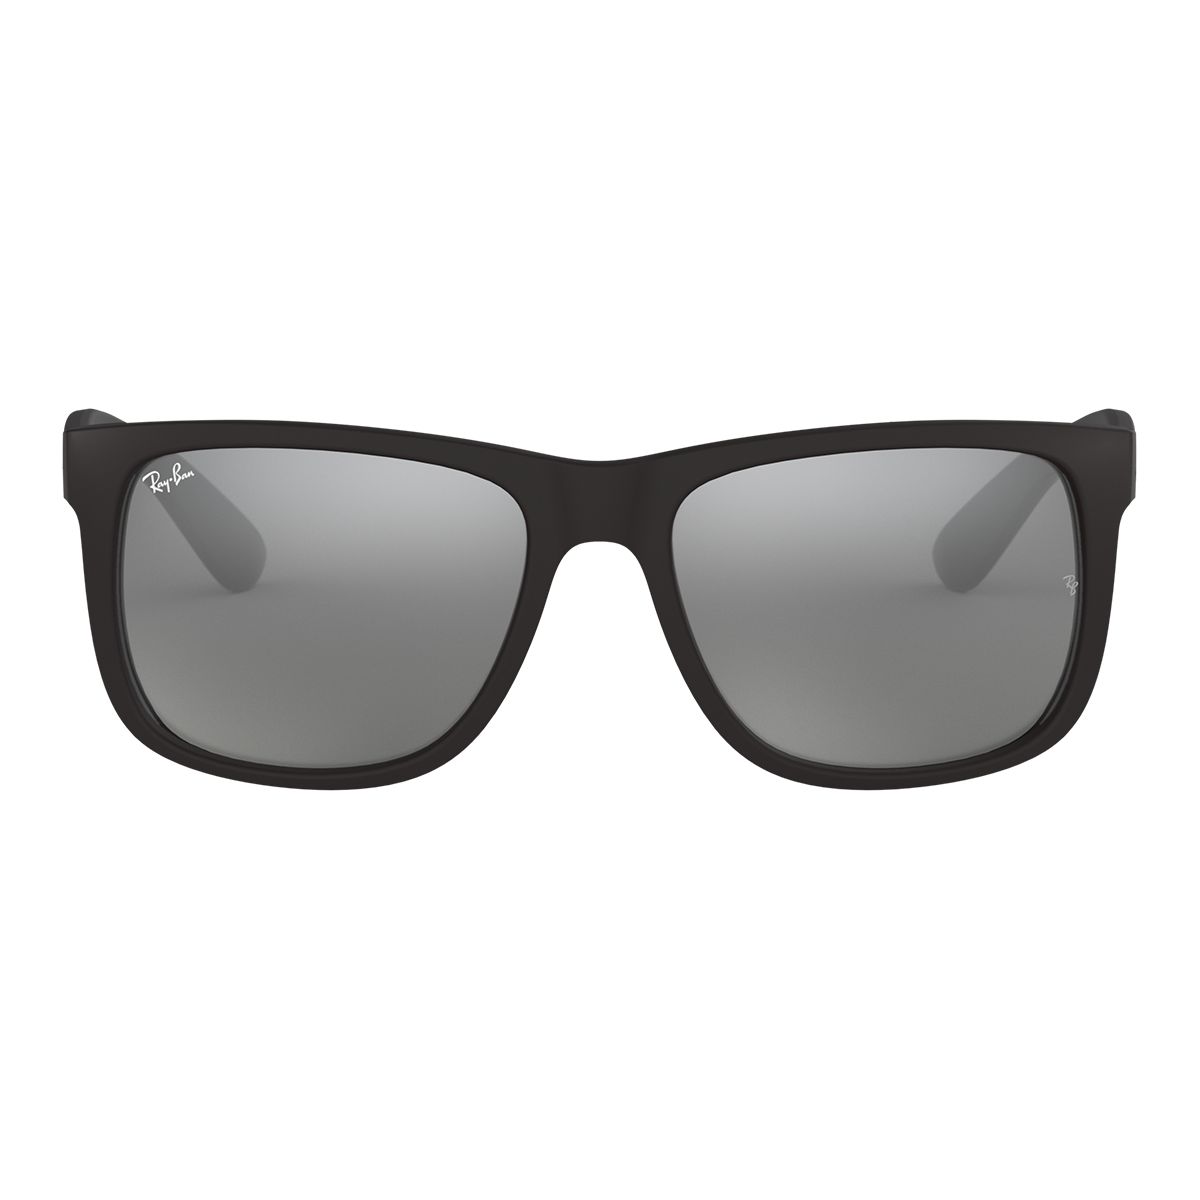 Image of Ray Ban Justin Rubber Sunglasses